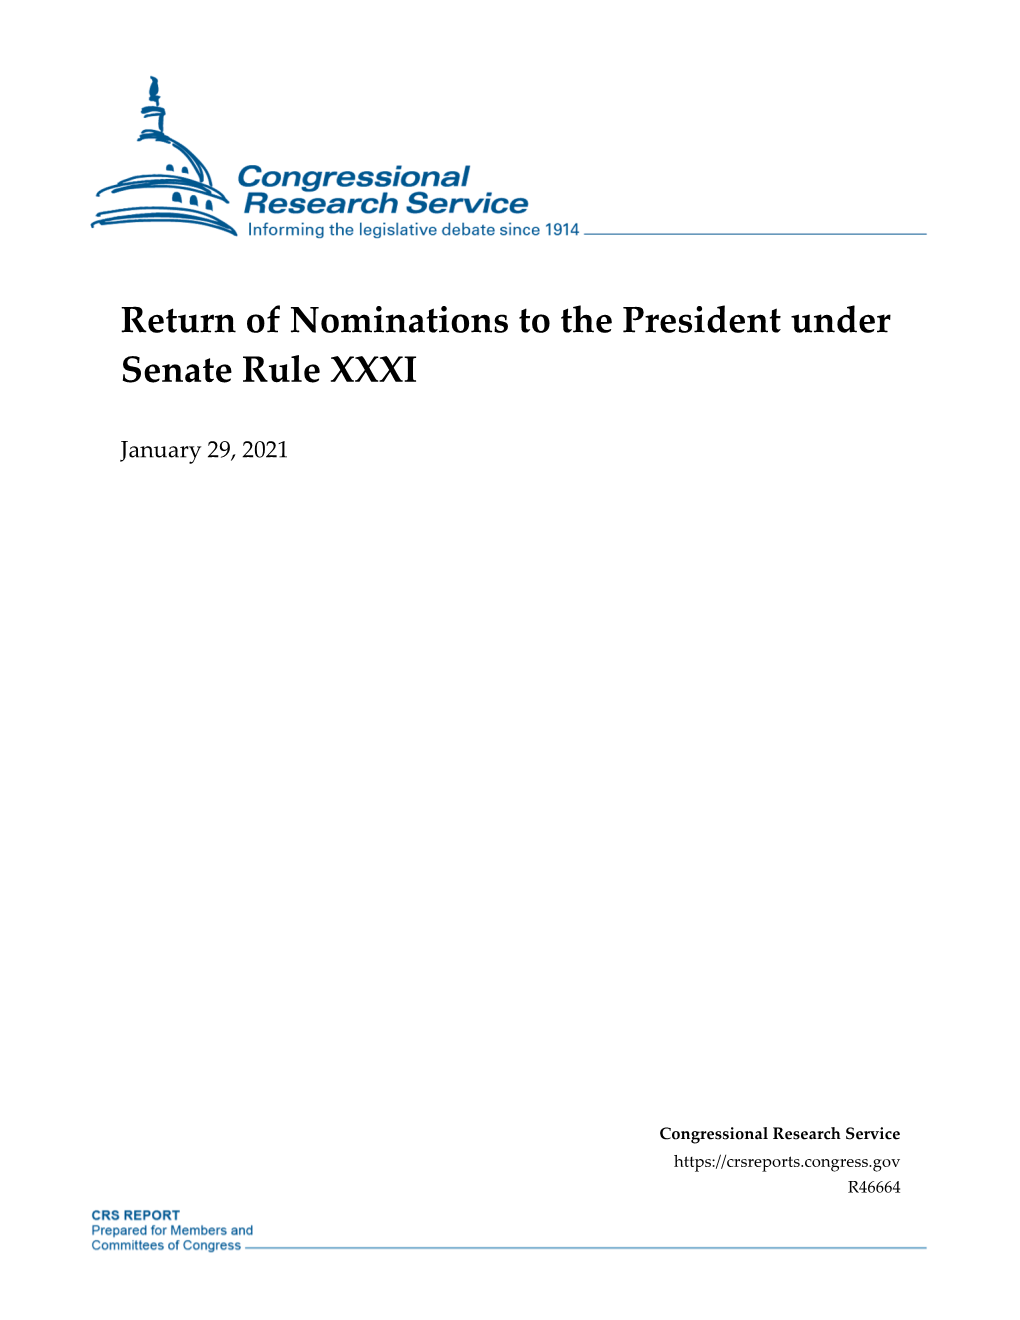 Return of Nominations to the President Under Senate Rule XXXI